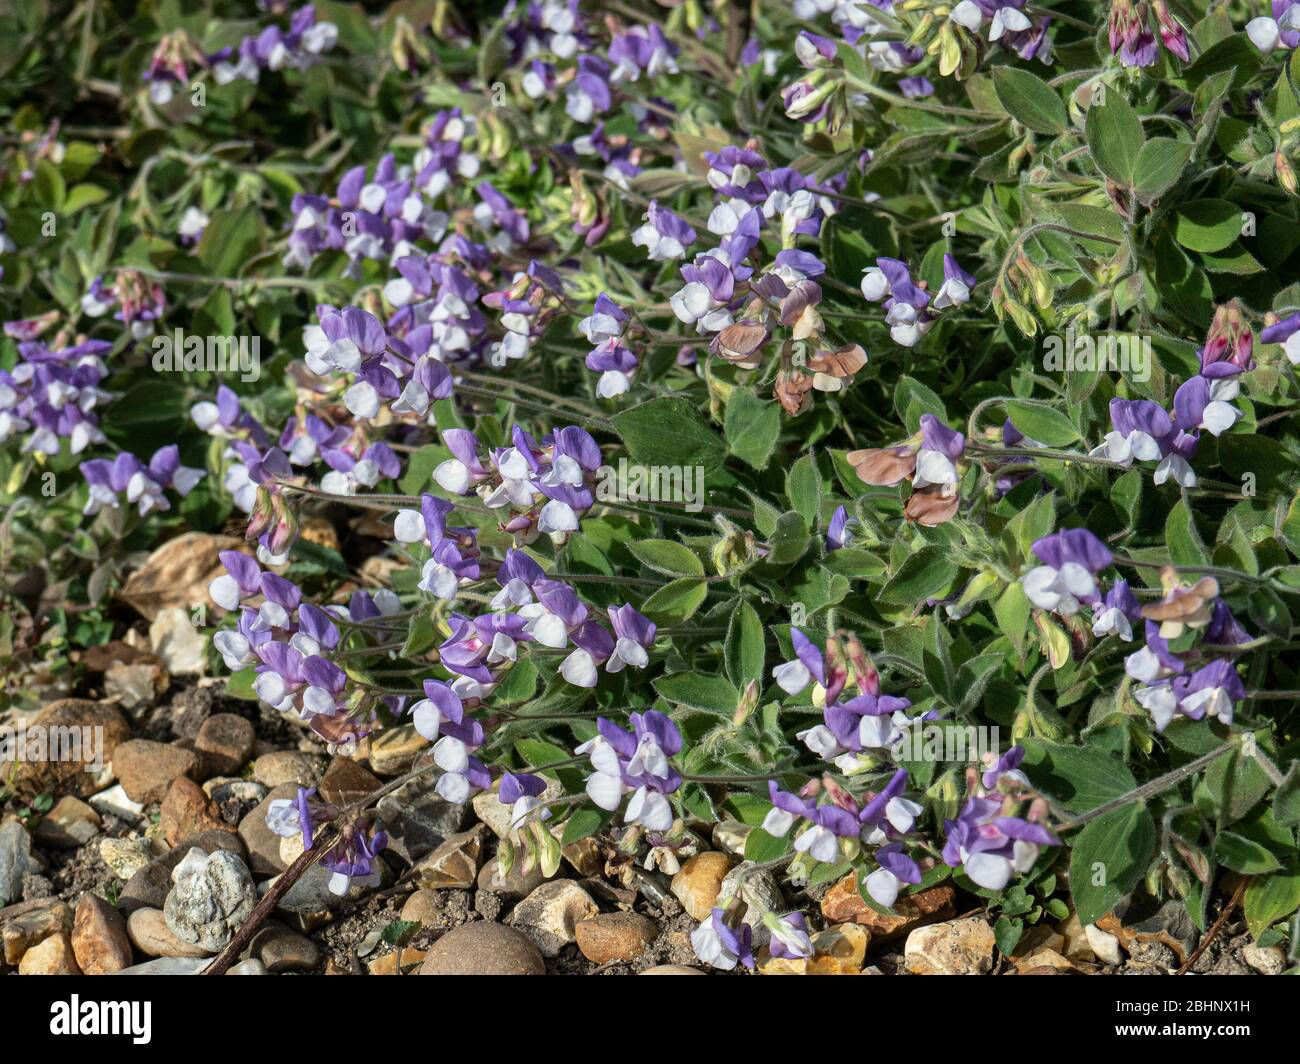 A plant of the lavender and white Lathyrus laxiflorus spreading across a gravel area Stock Photo